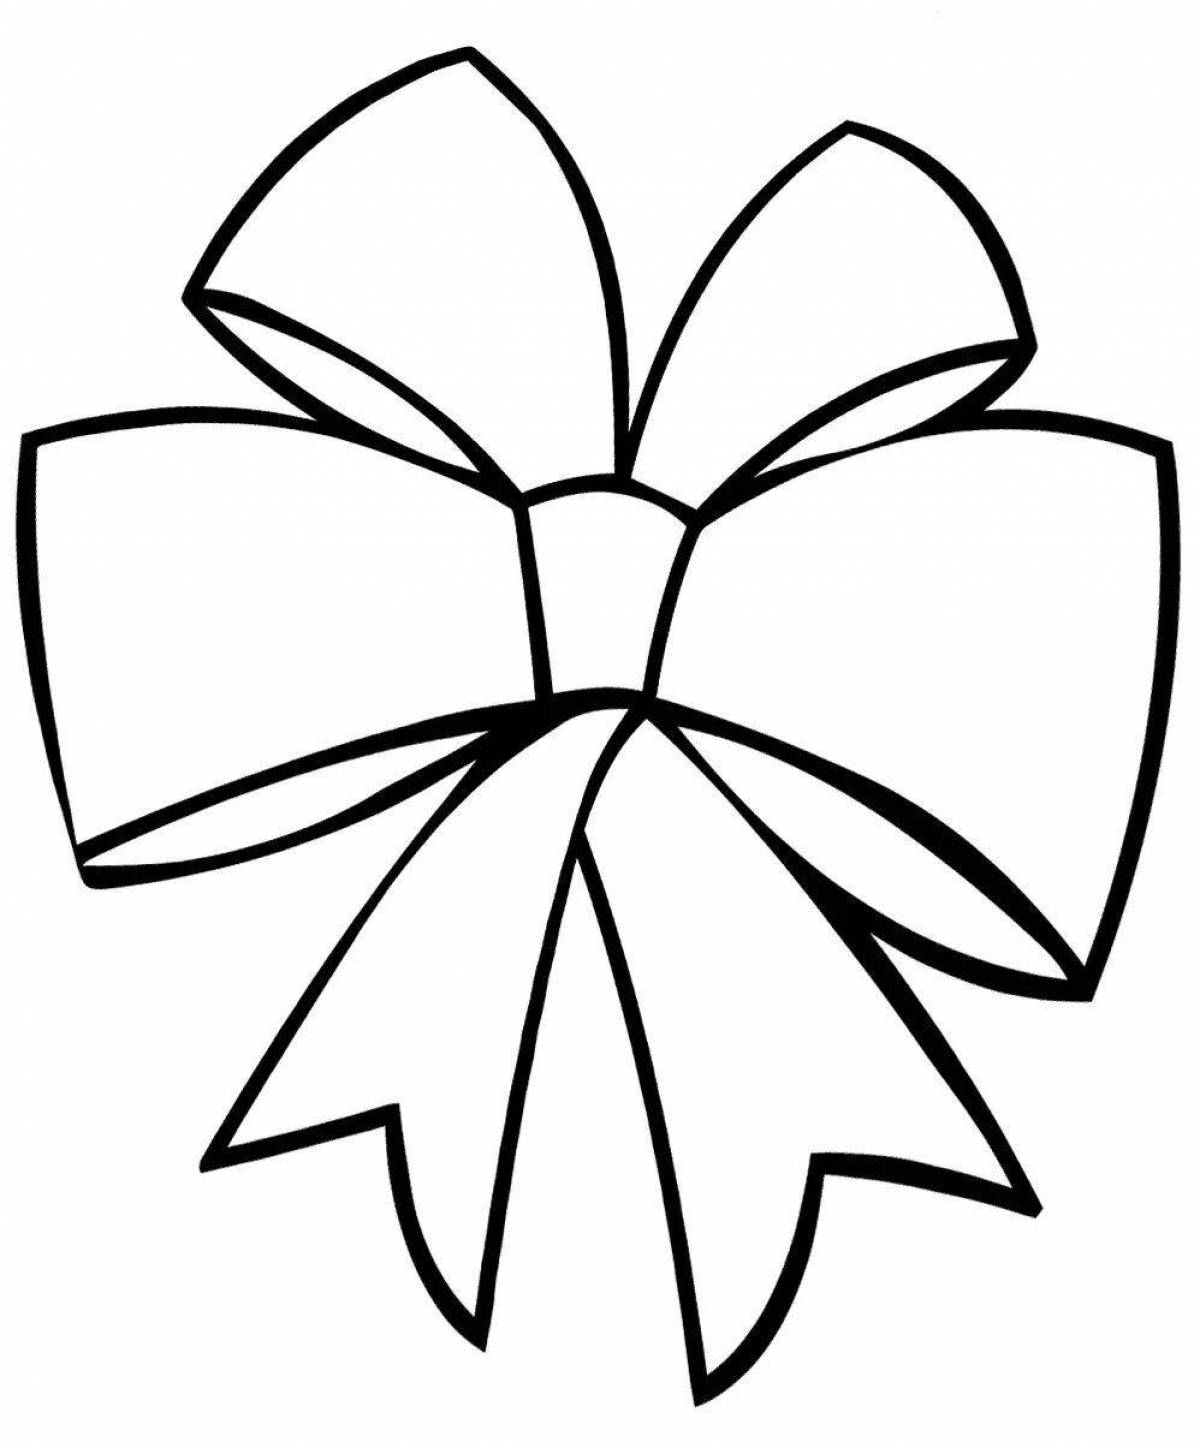 Adorable bow coloring page